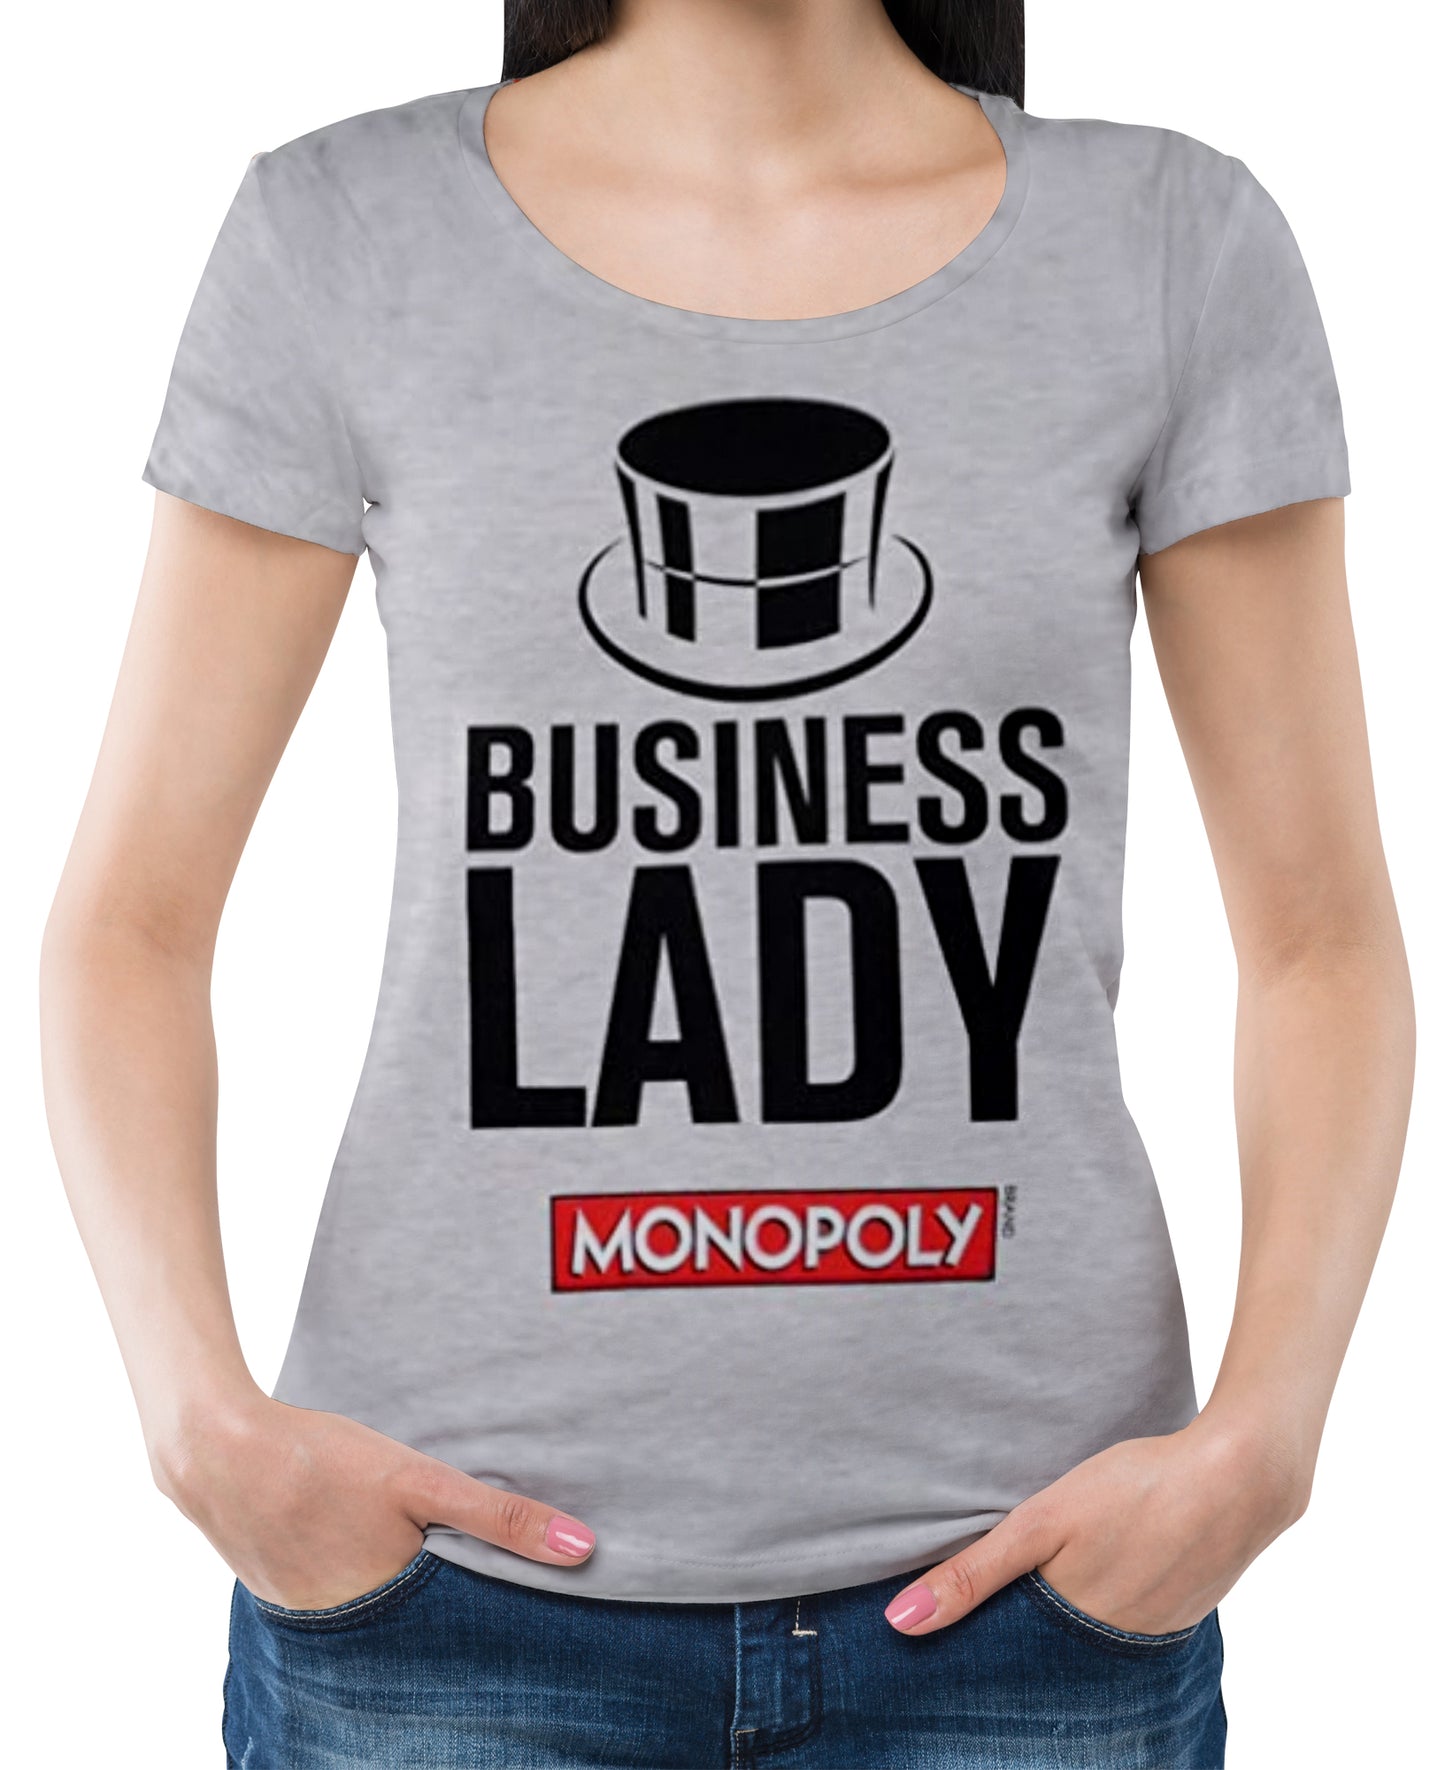 Monopoly Women's Short Sleeve ribbed scoop neck T-Shirt marl Grey light breathable polycotton